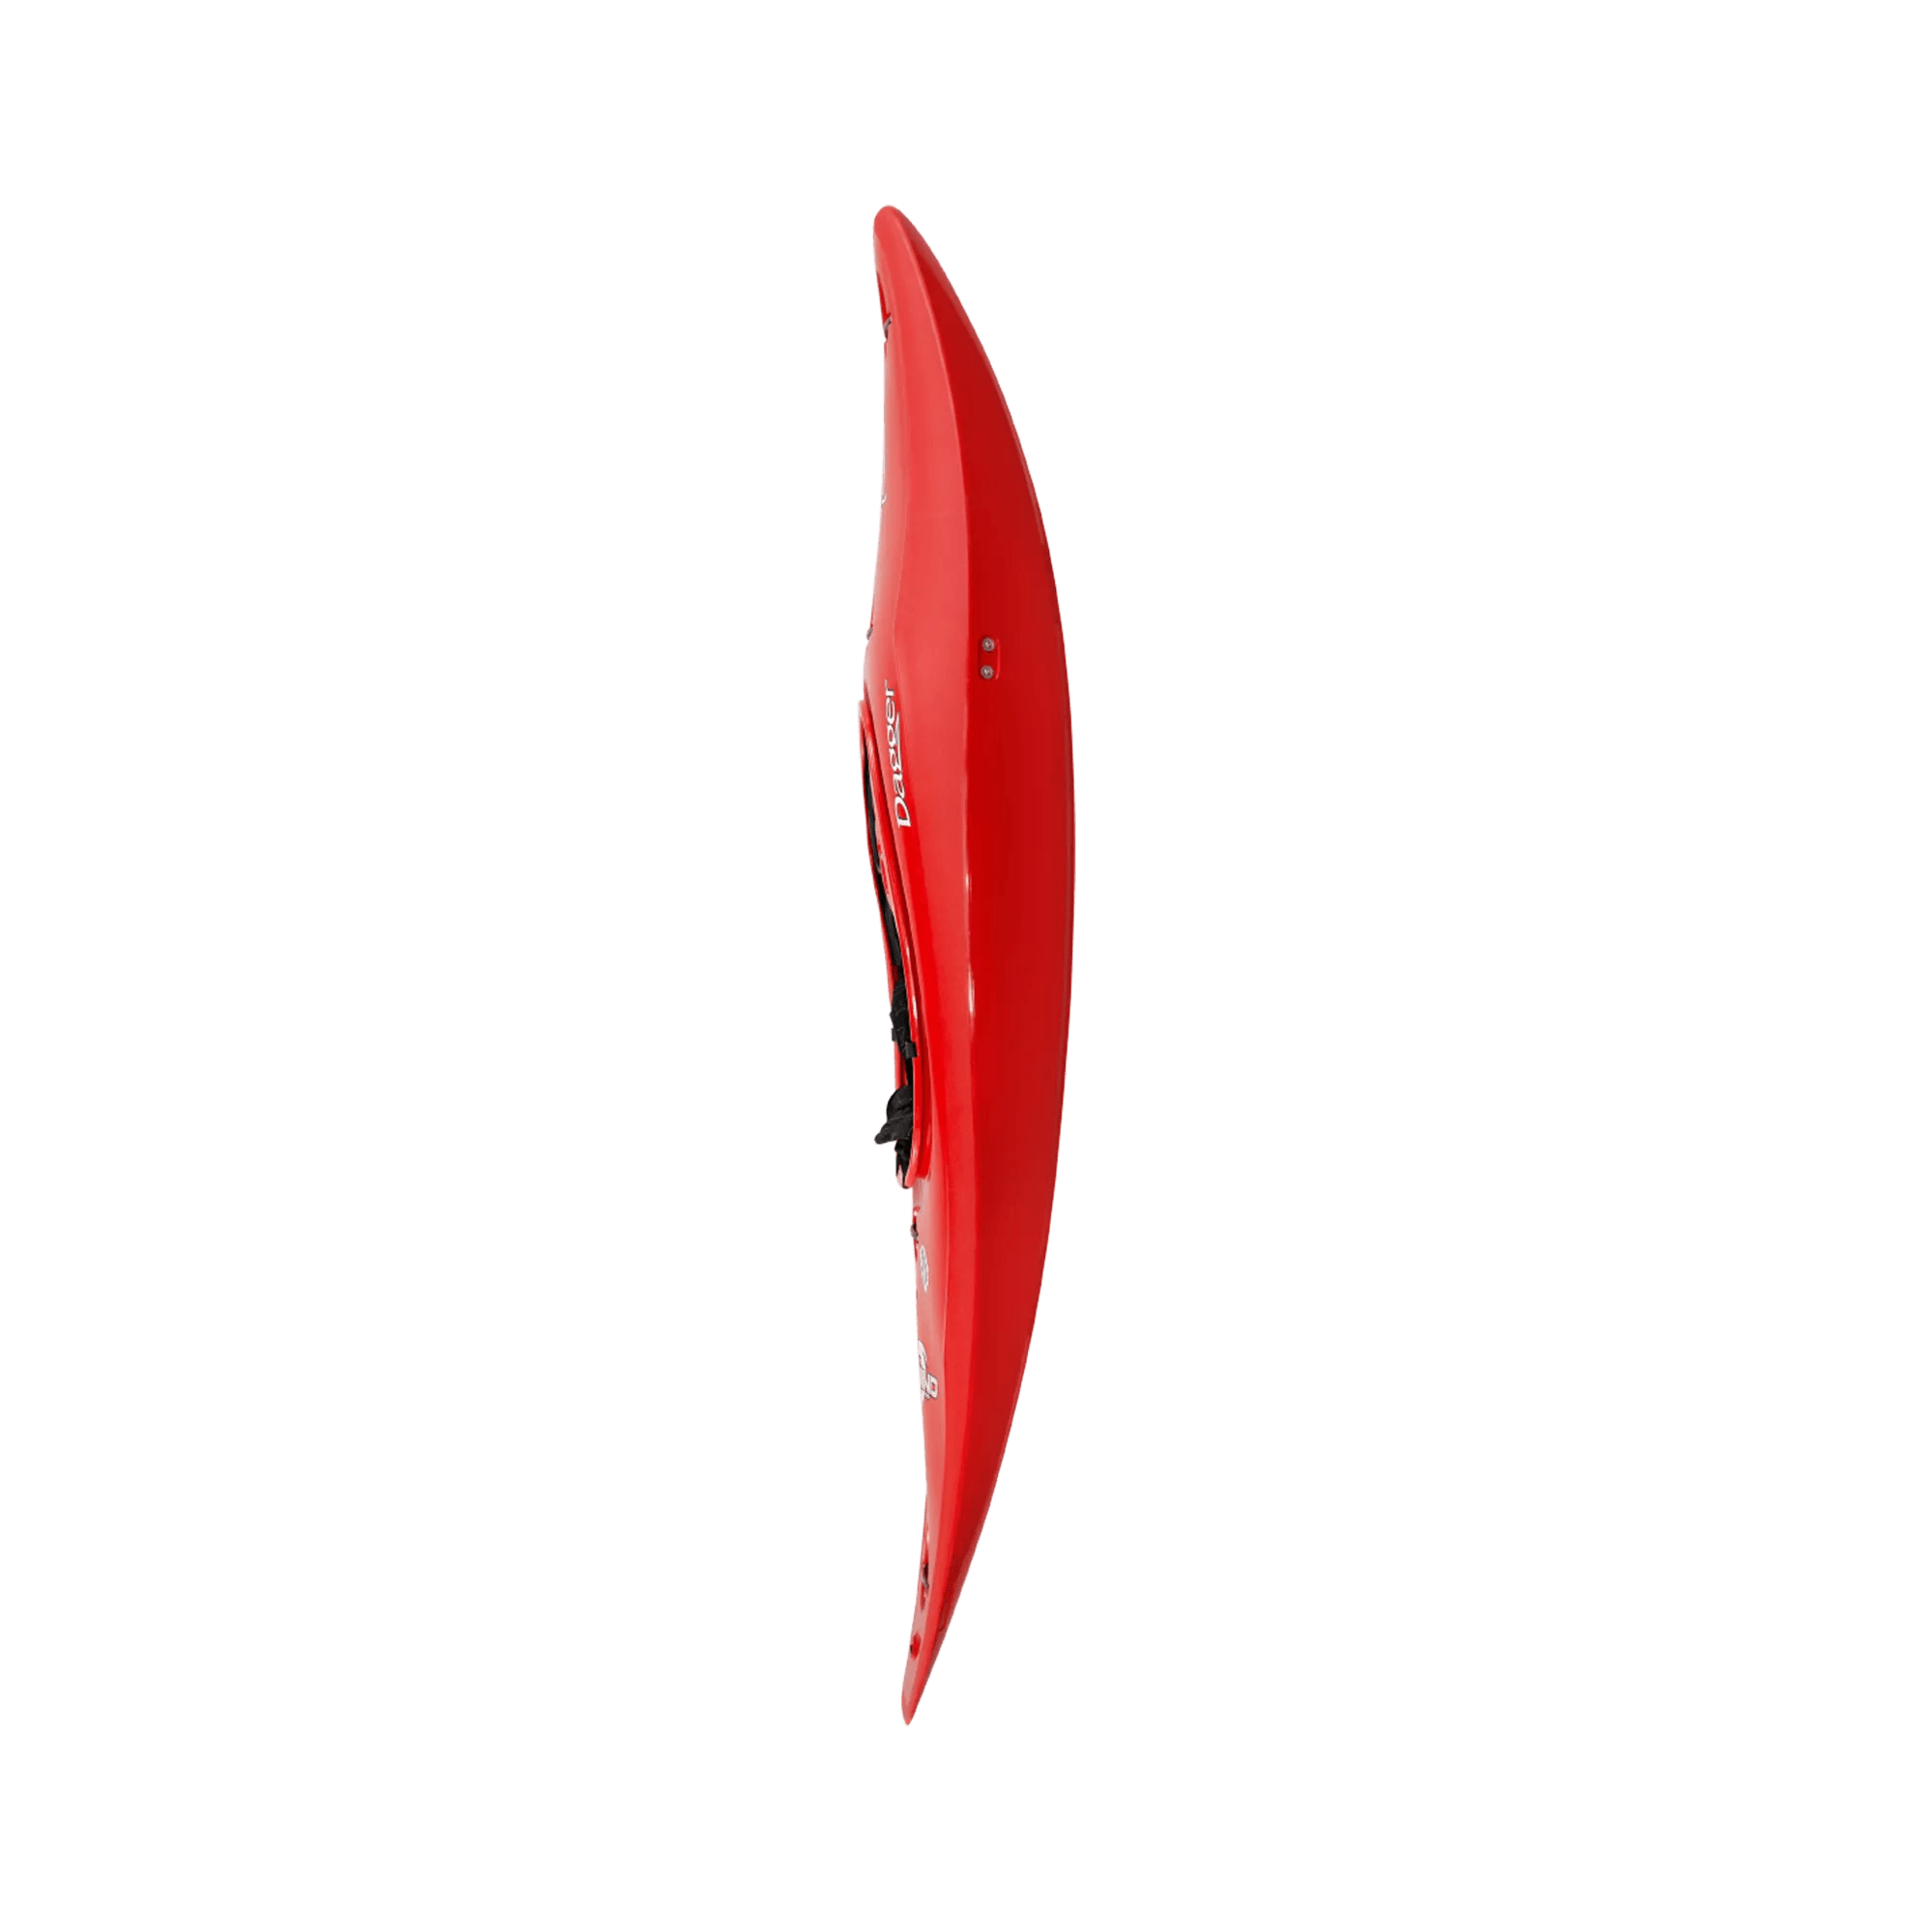 DAGGER - Rewind MD River Play Whitewater Kayak - Red - 9010344057 - SIDE